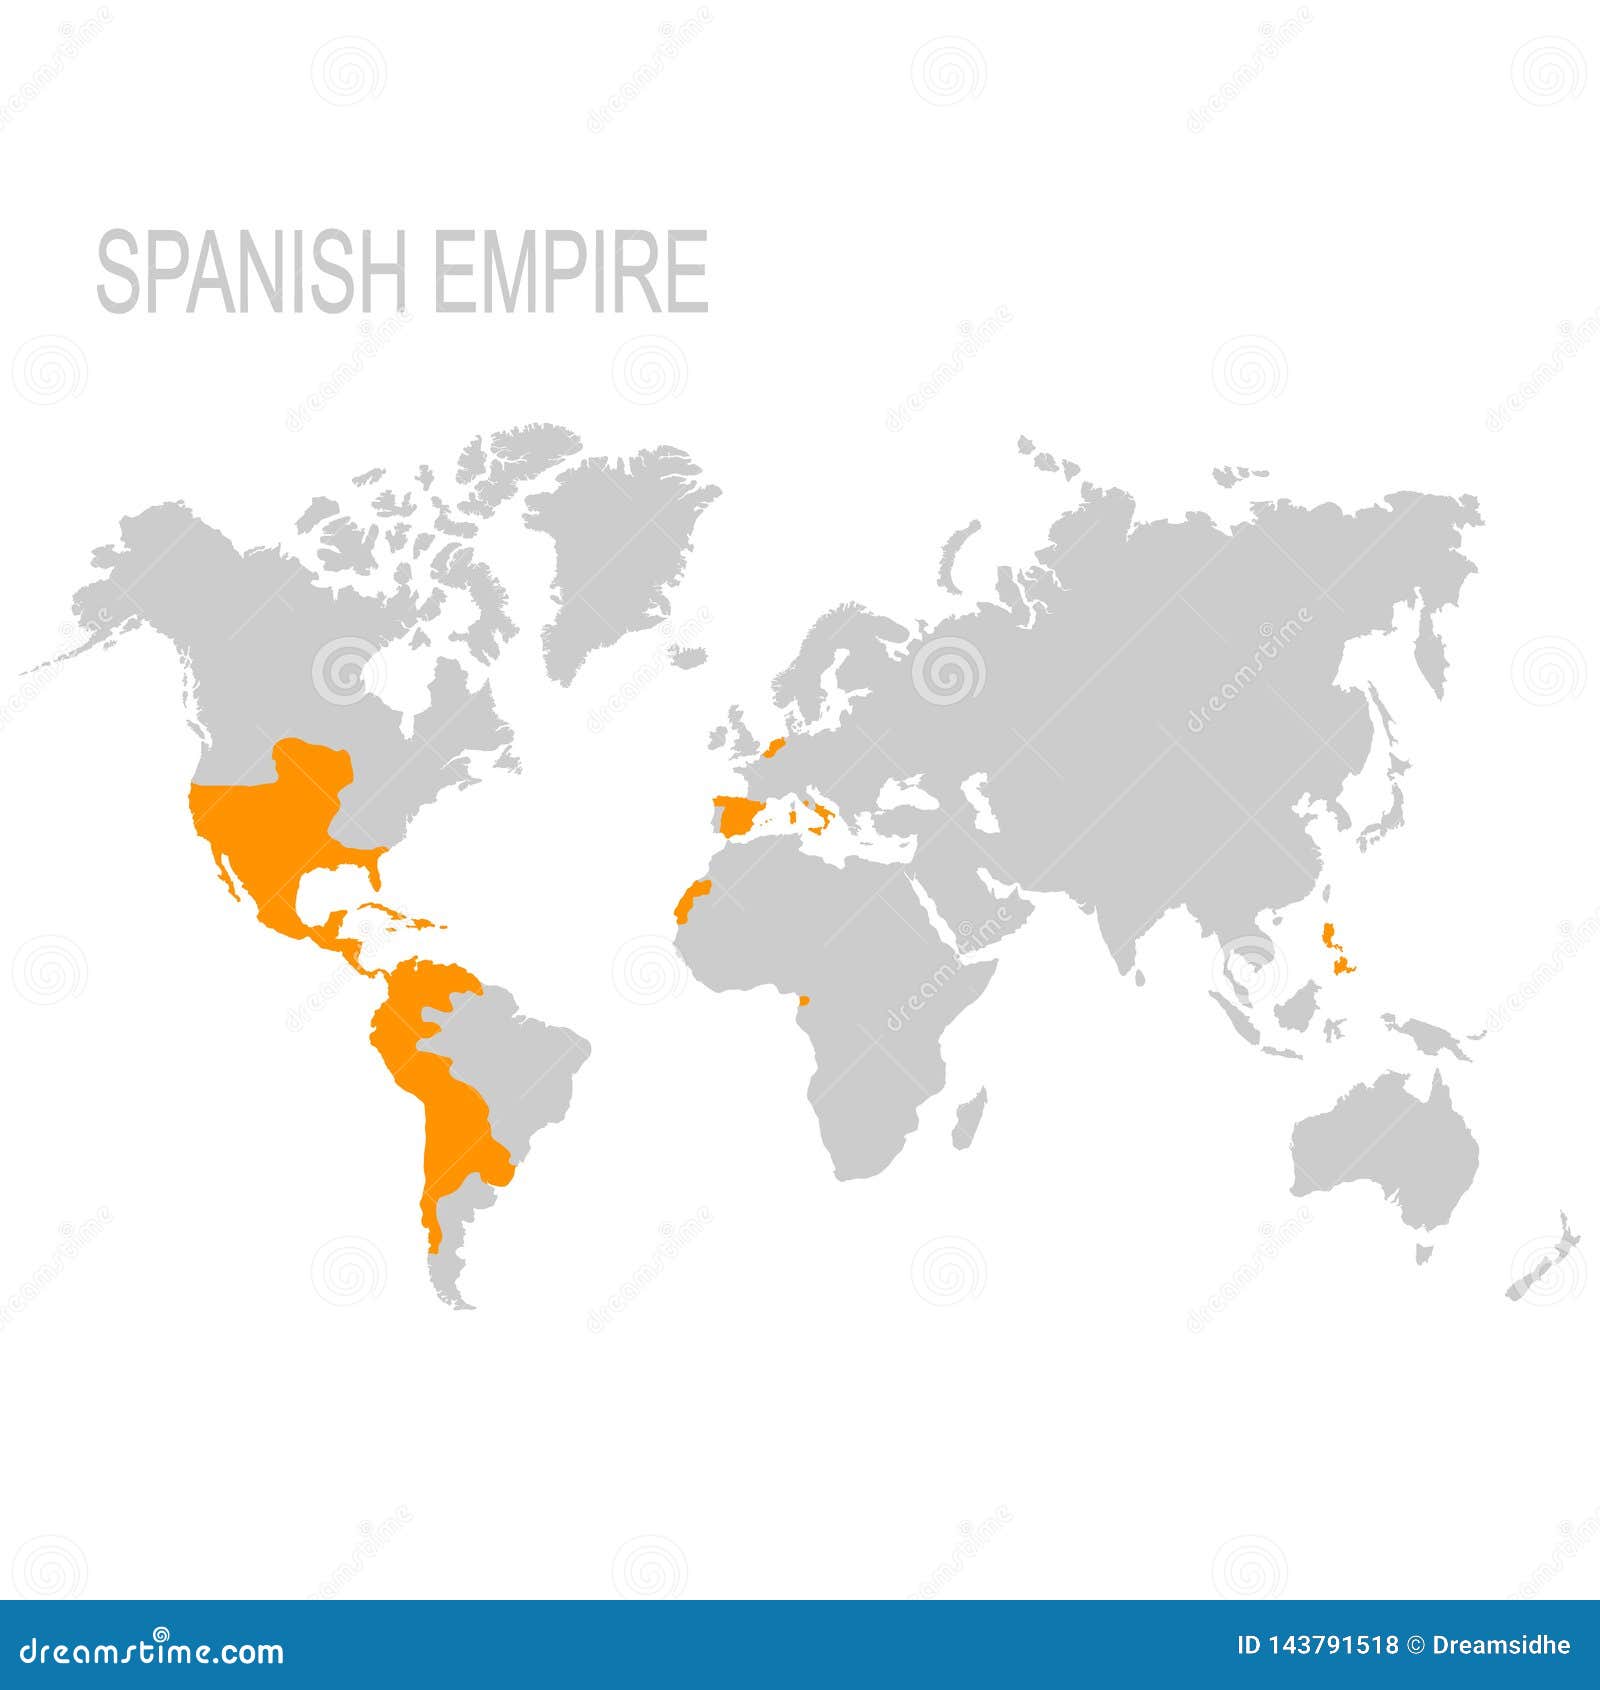 map of the spanish empire